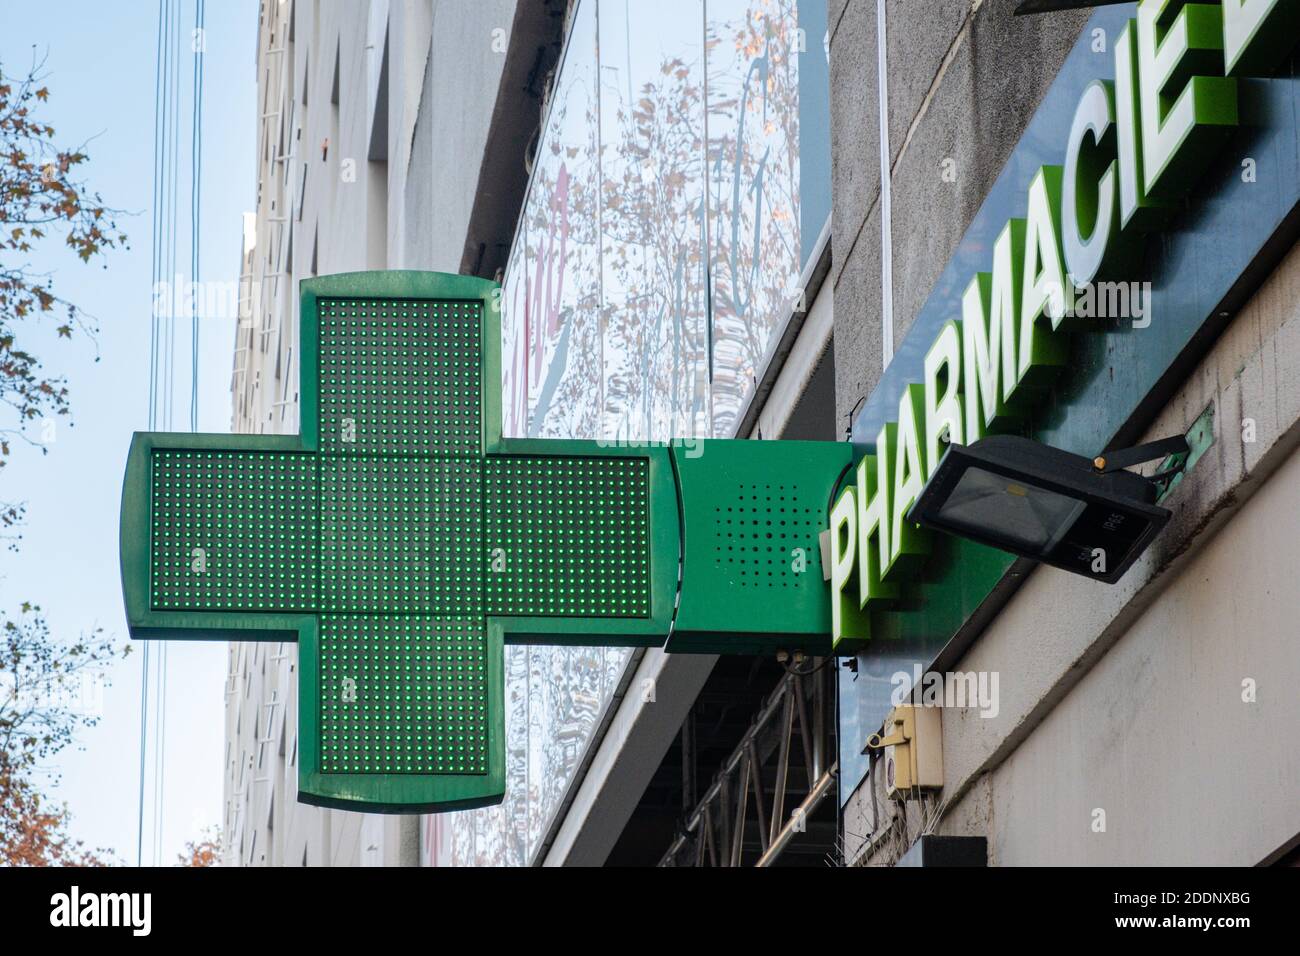 Lyon (France), 24 November 2020. Green cross from a pharmacy. This symbol is also called the Greek cross. Stock Photo